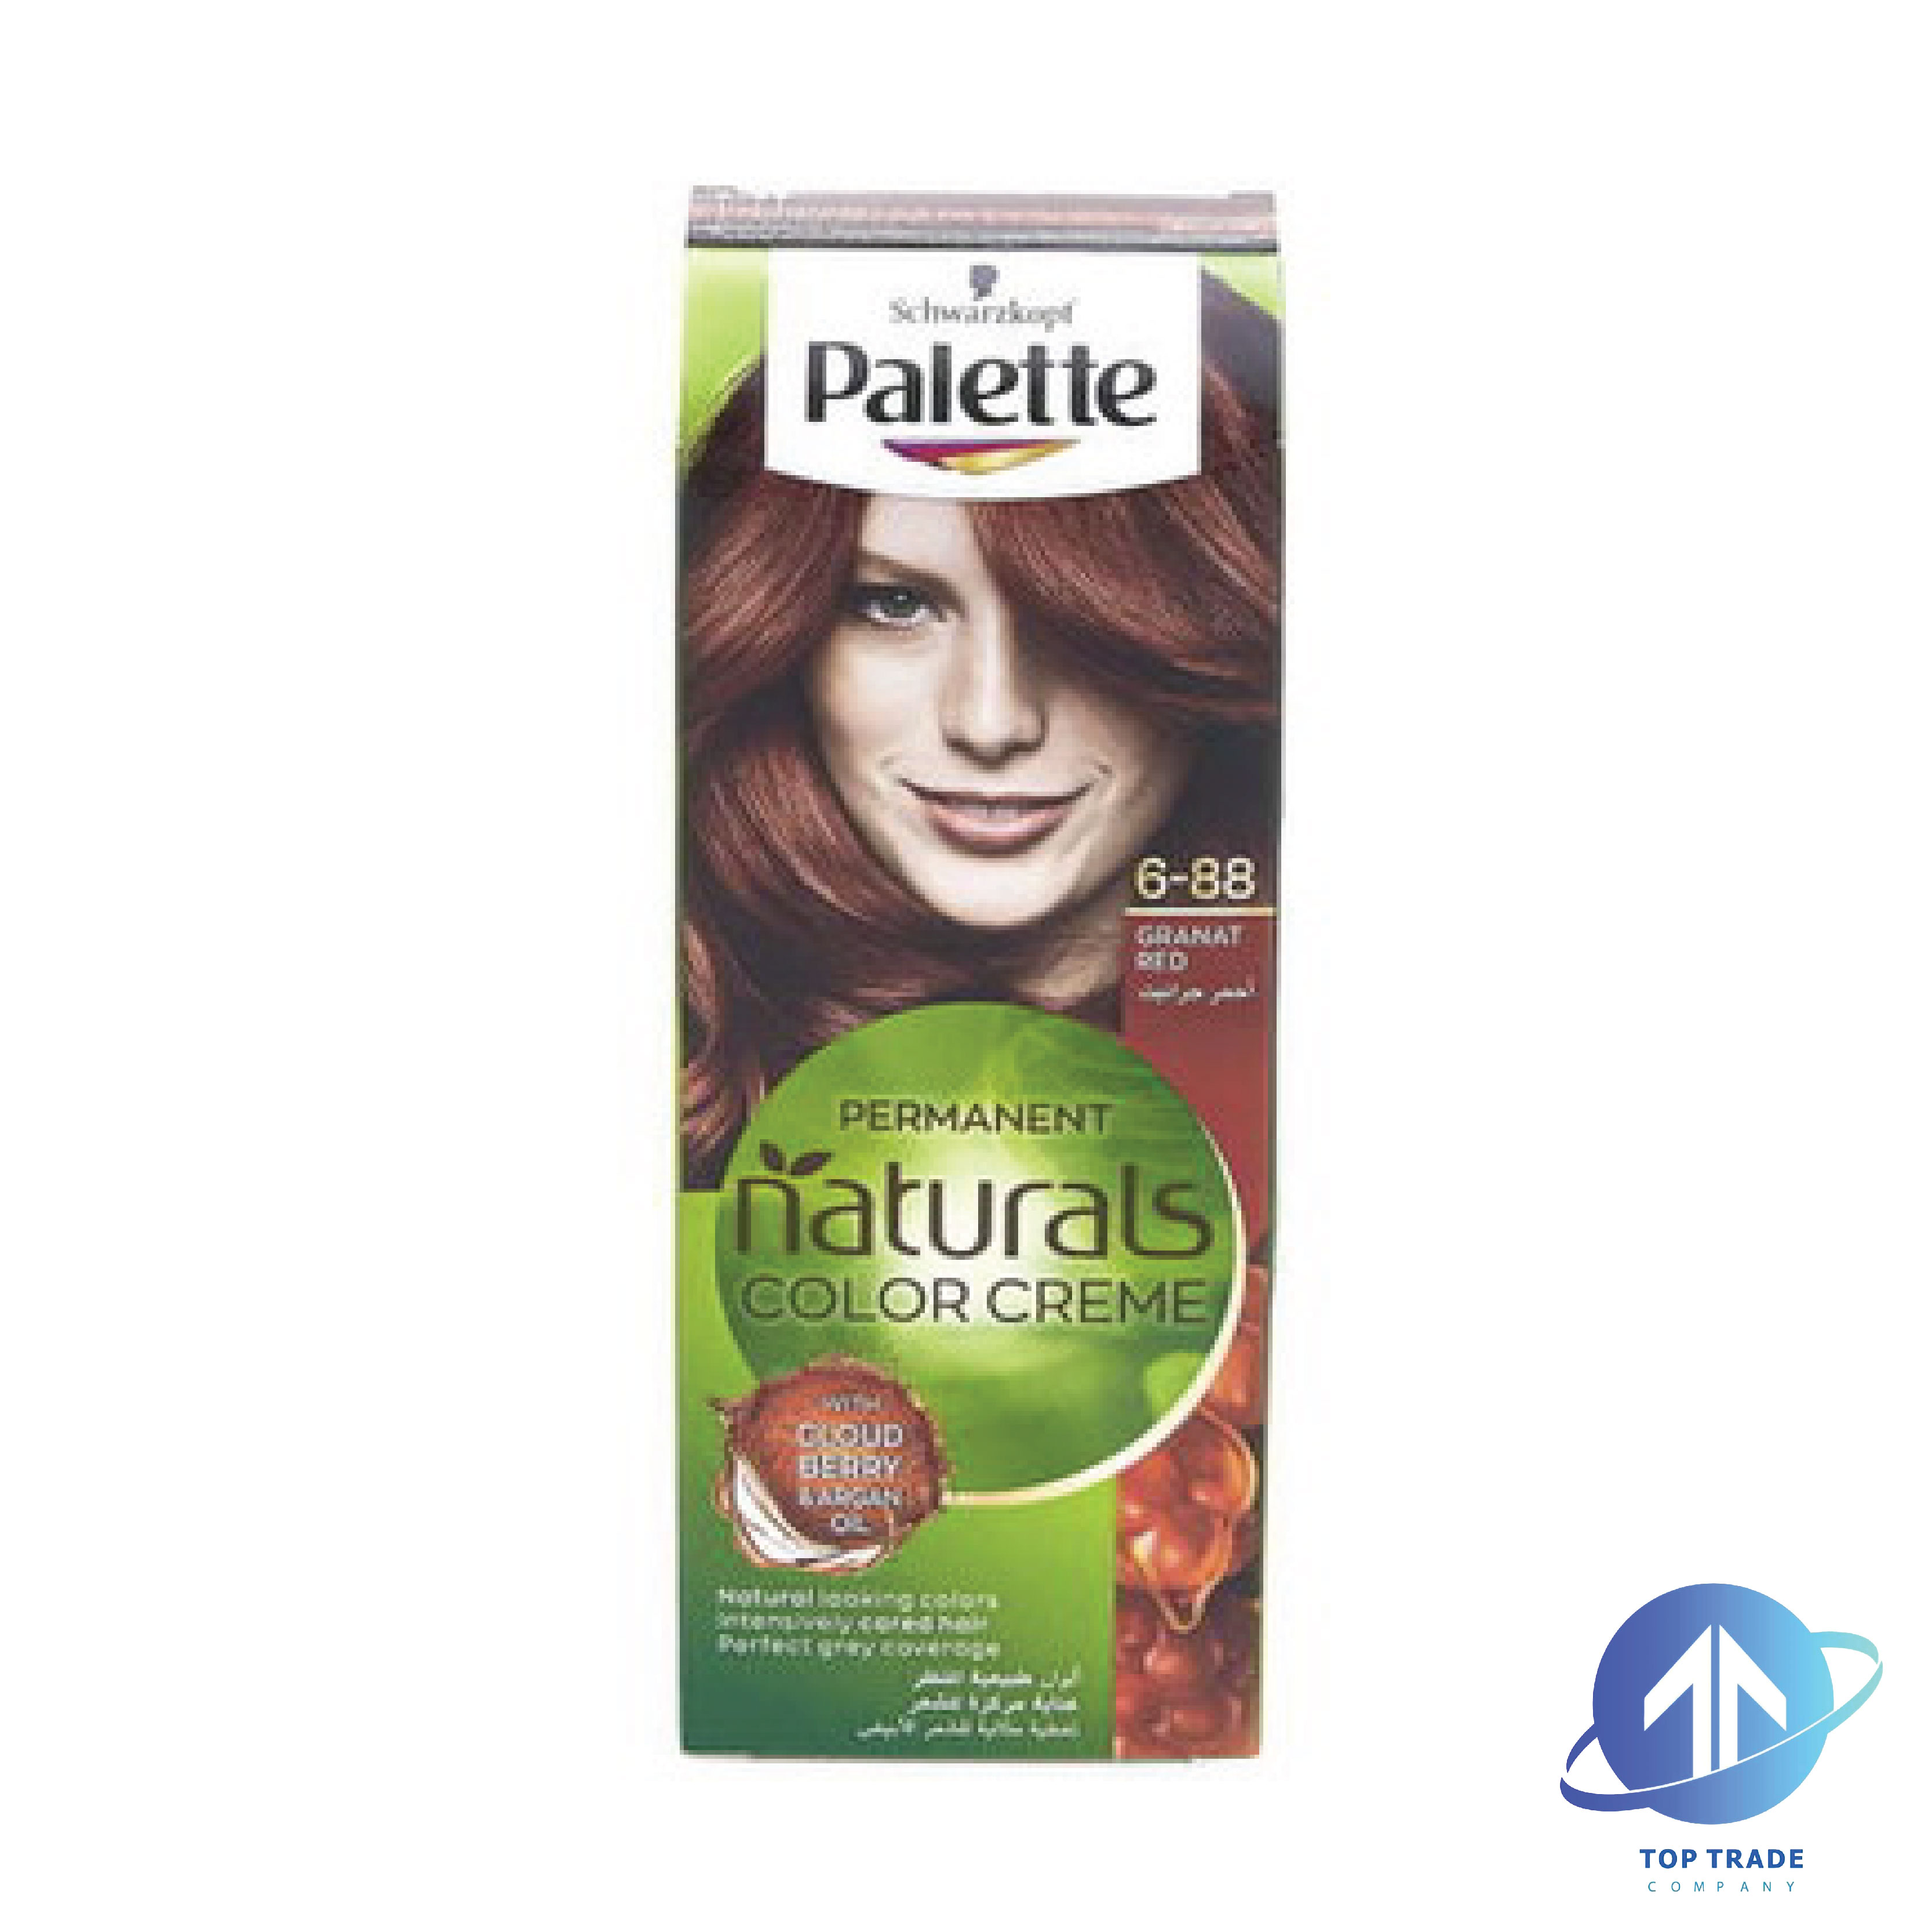 Palette hair coloring with argon oil hair color 6-88 granat red